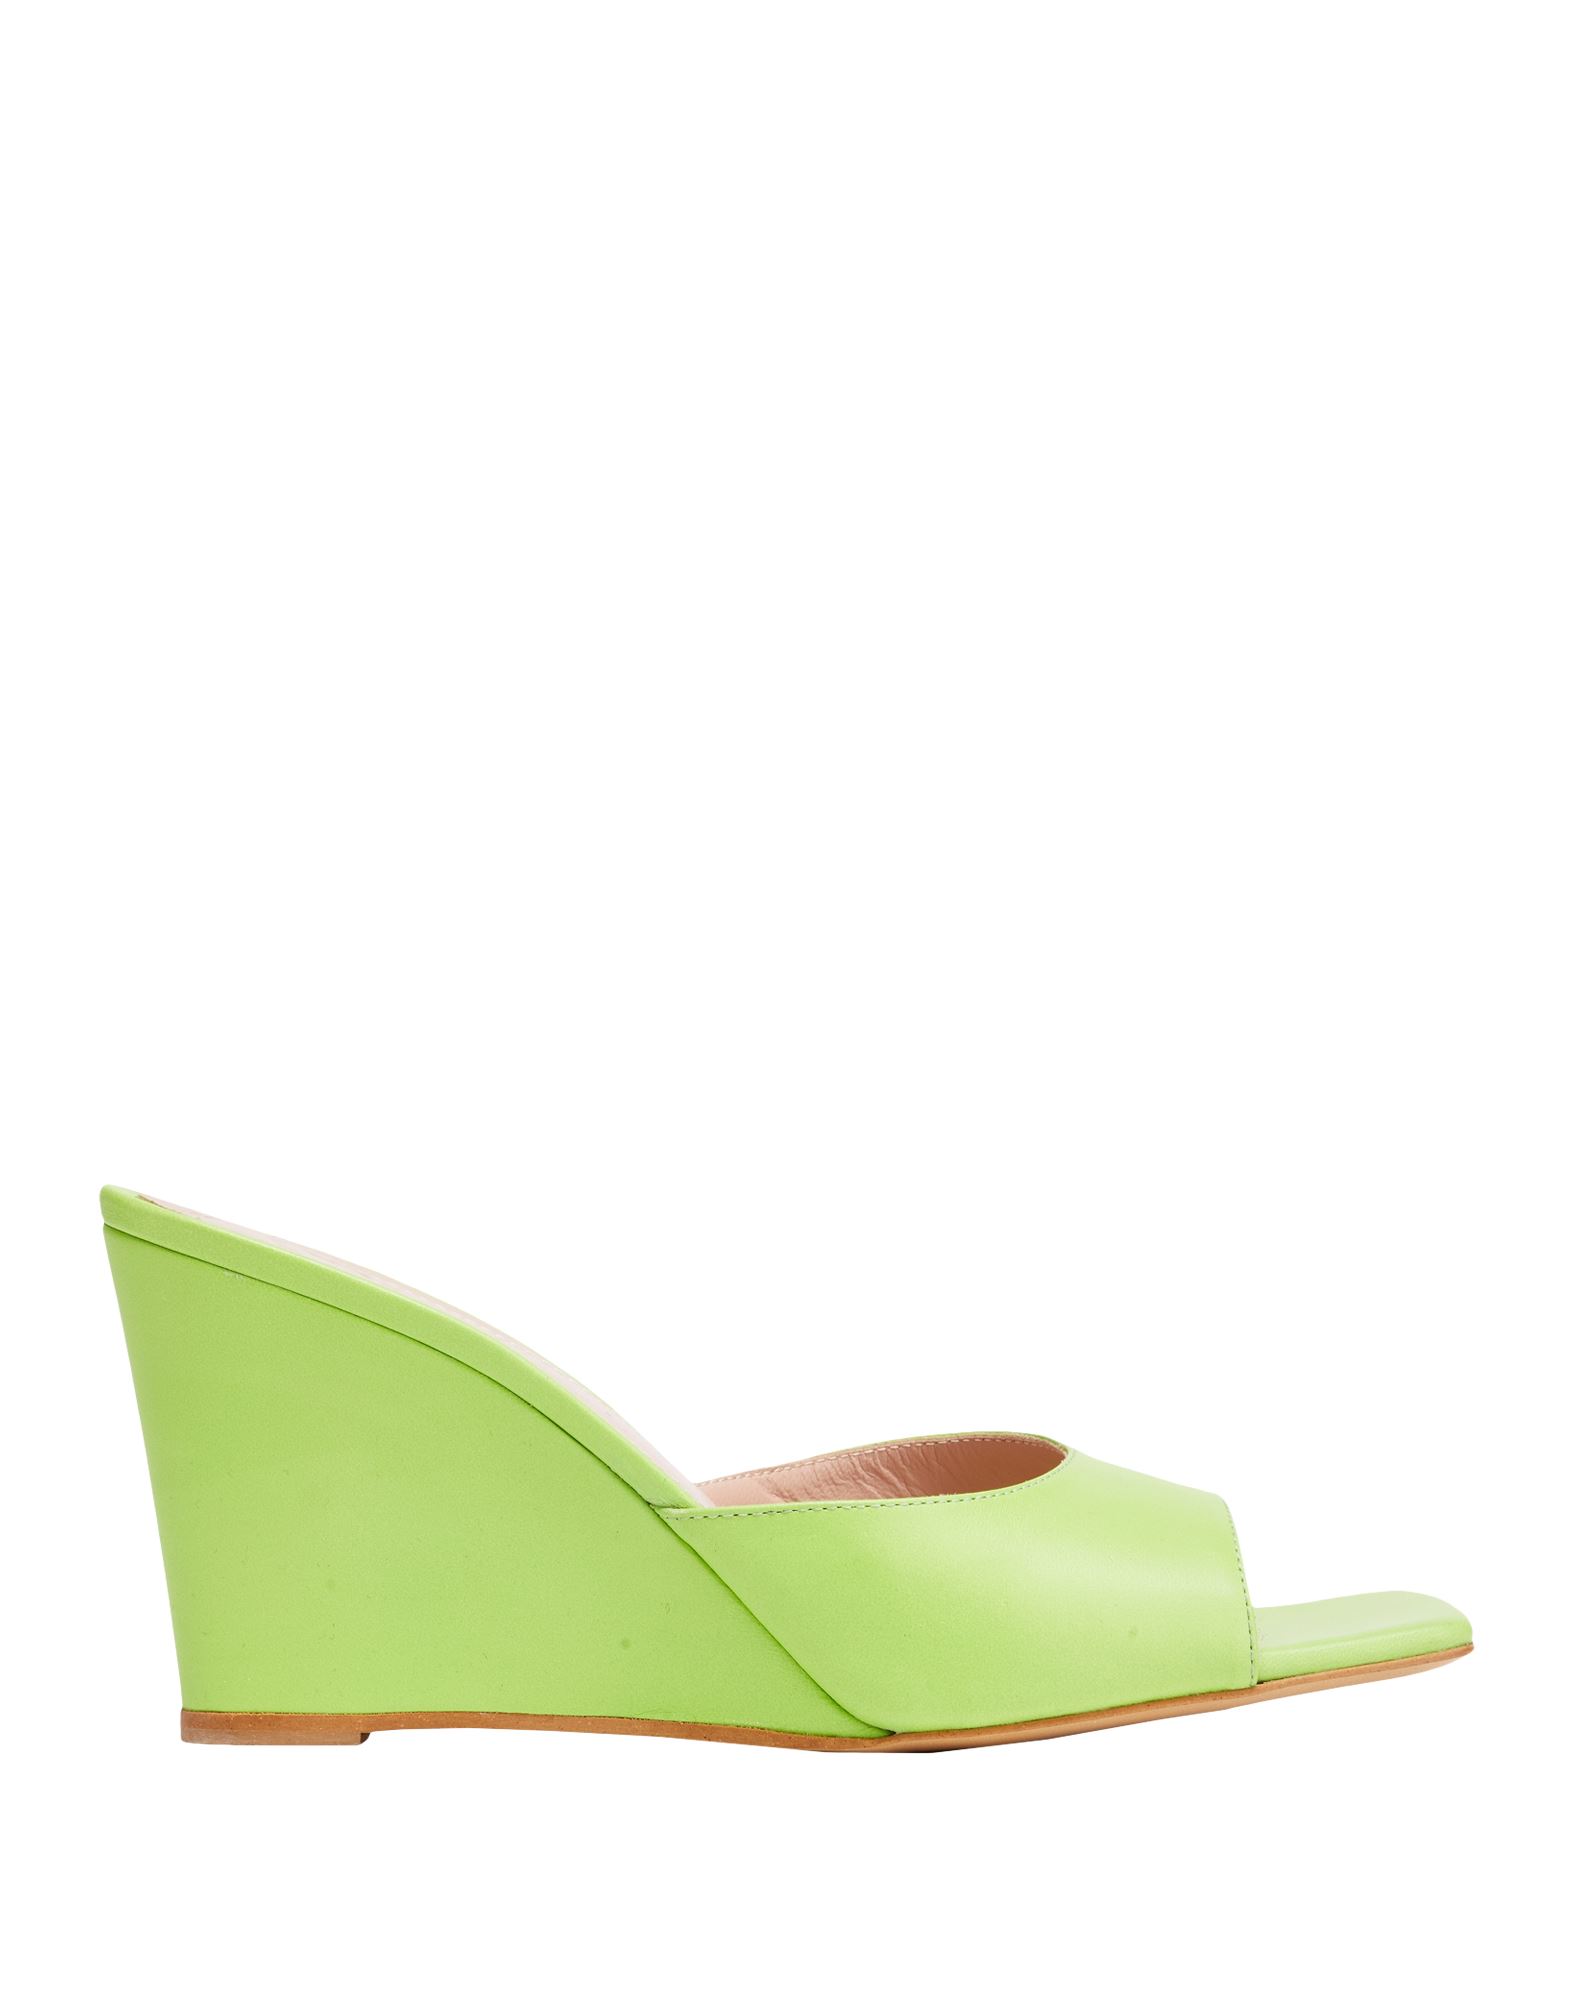 8 By Yoox Sandals In Green